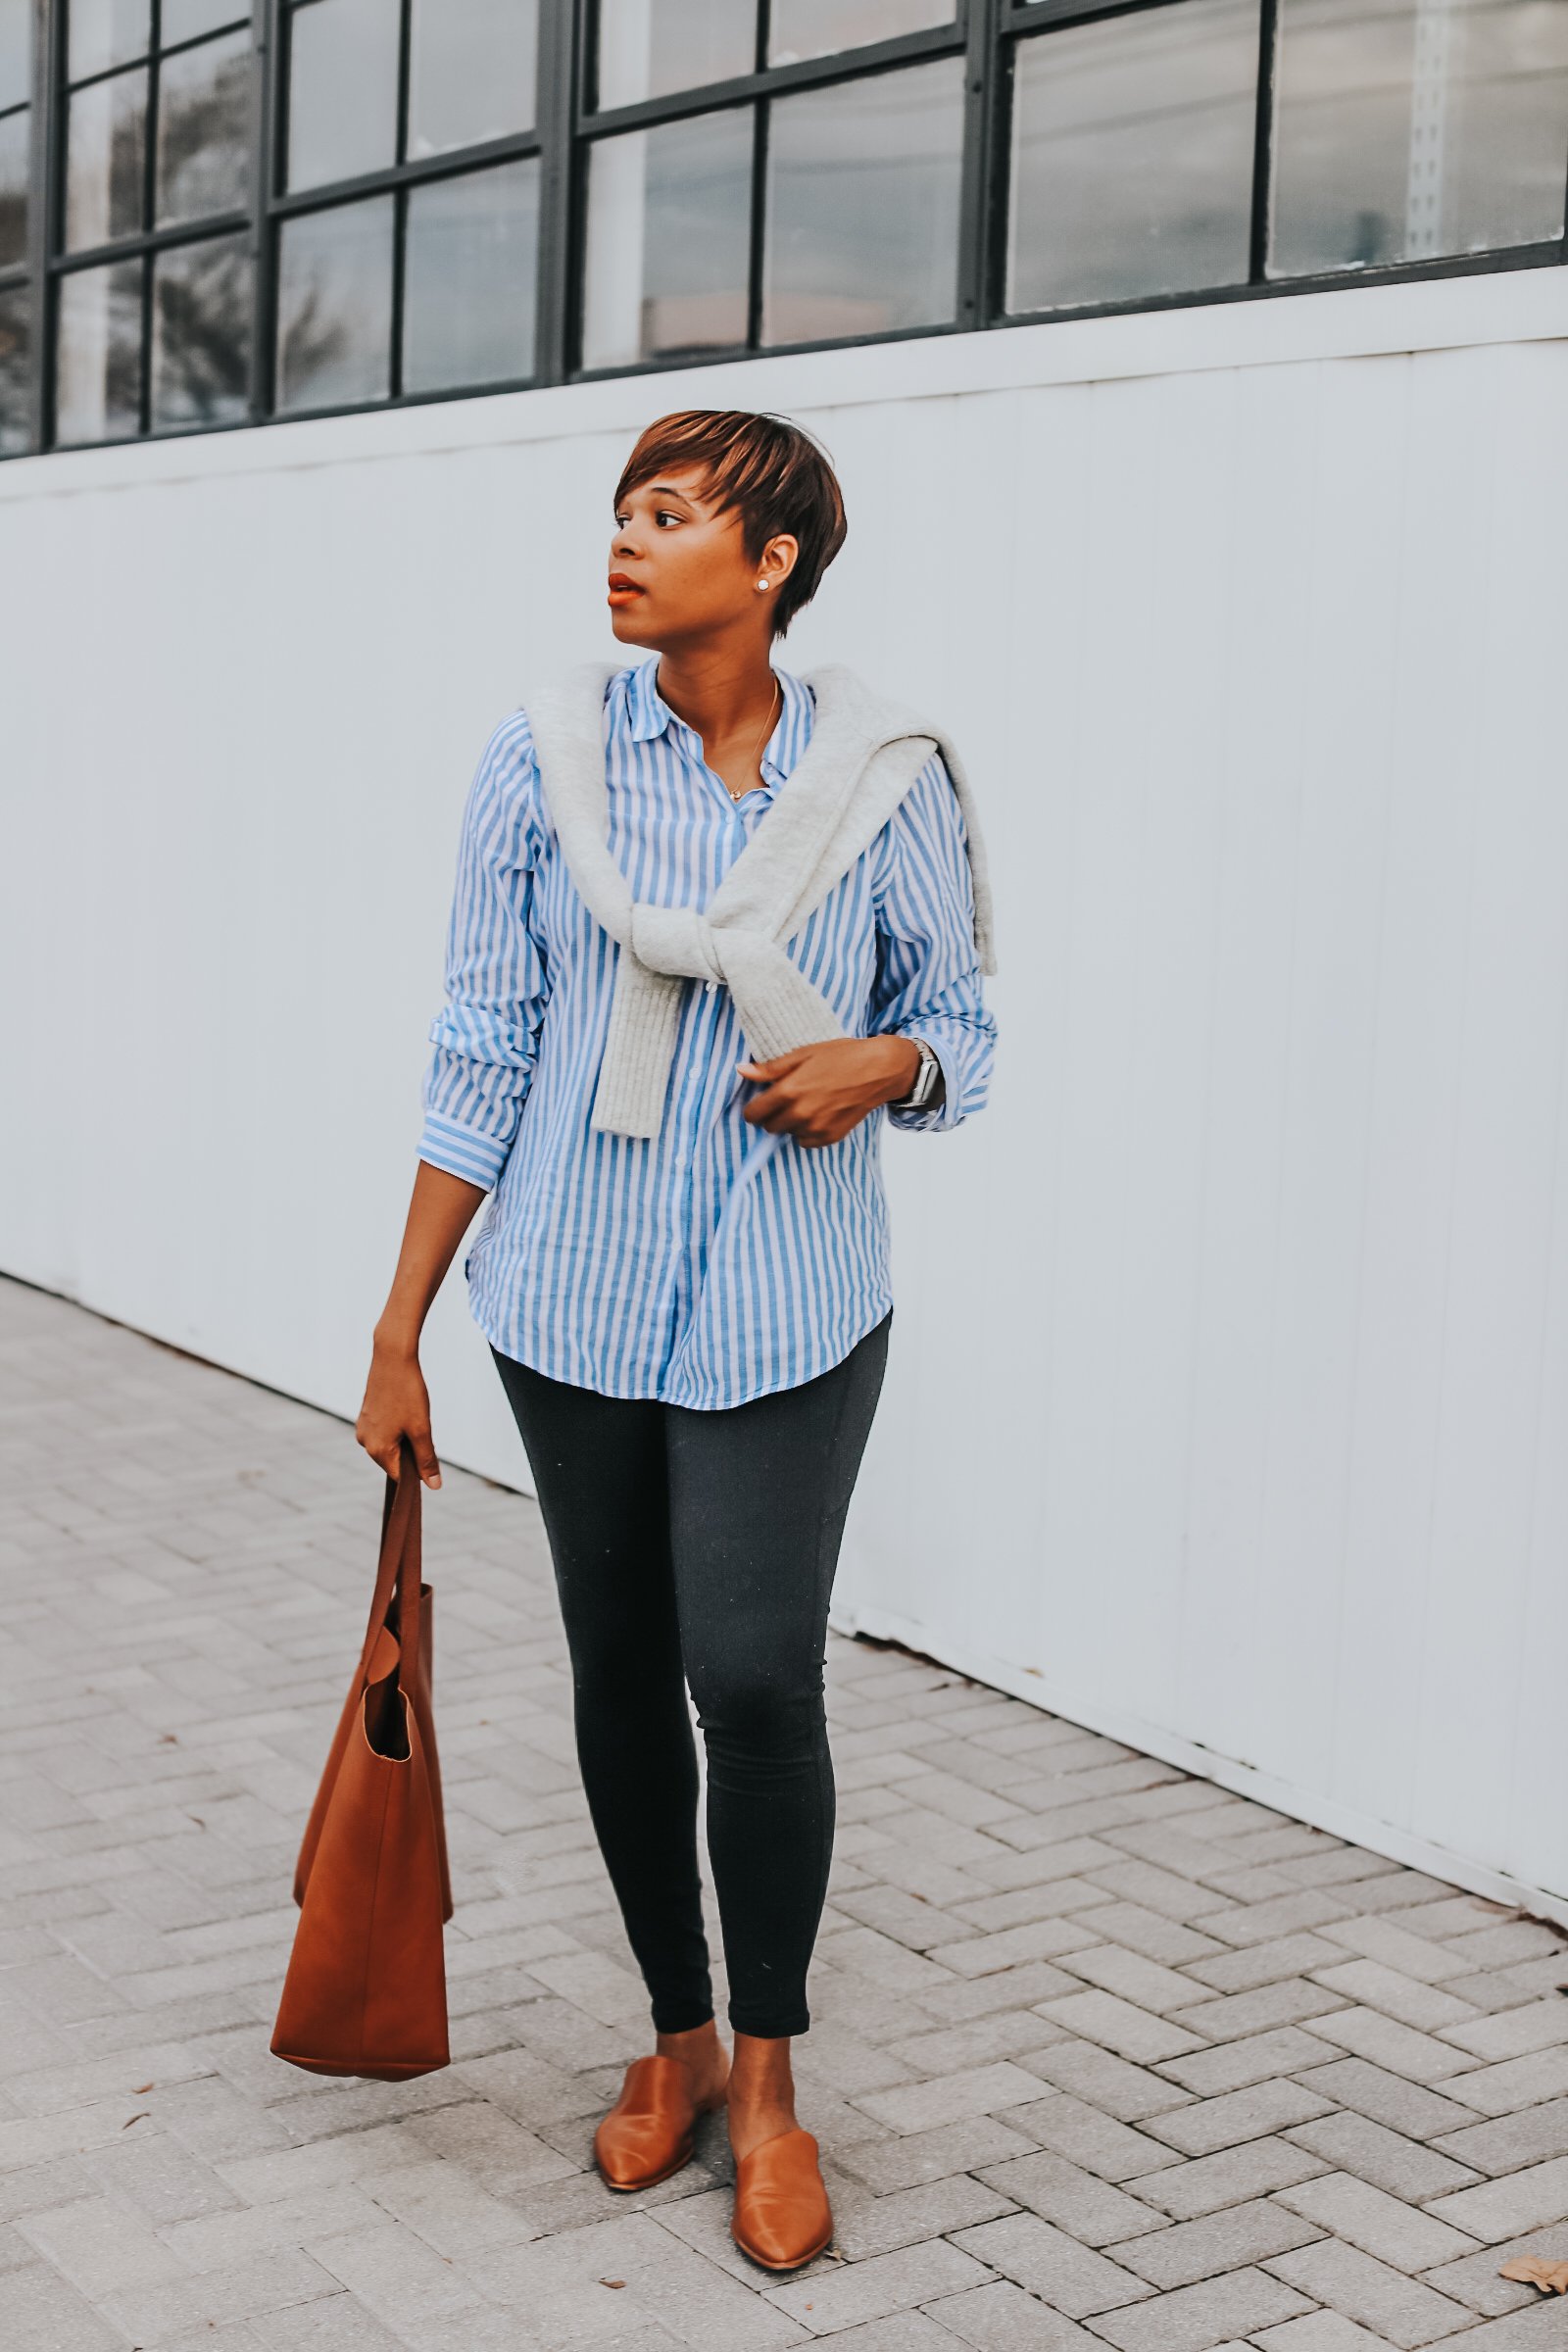 Mary's Little Way in A Gray Knotted Sweater, a Blue and White Striped Boyfriend Shirt, Tan Mules, and Tan Tote bag